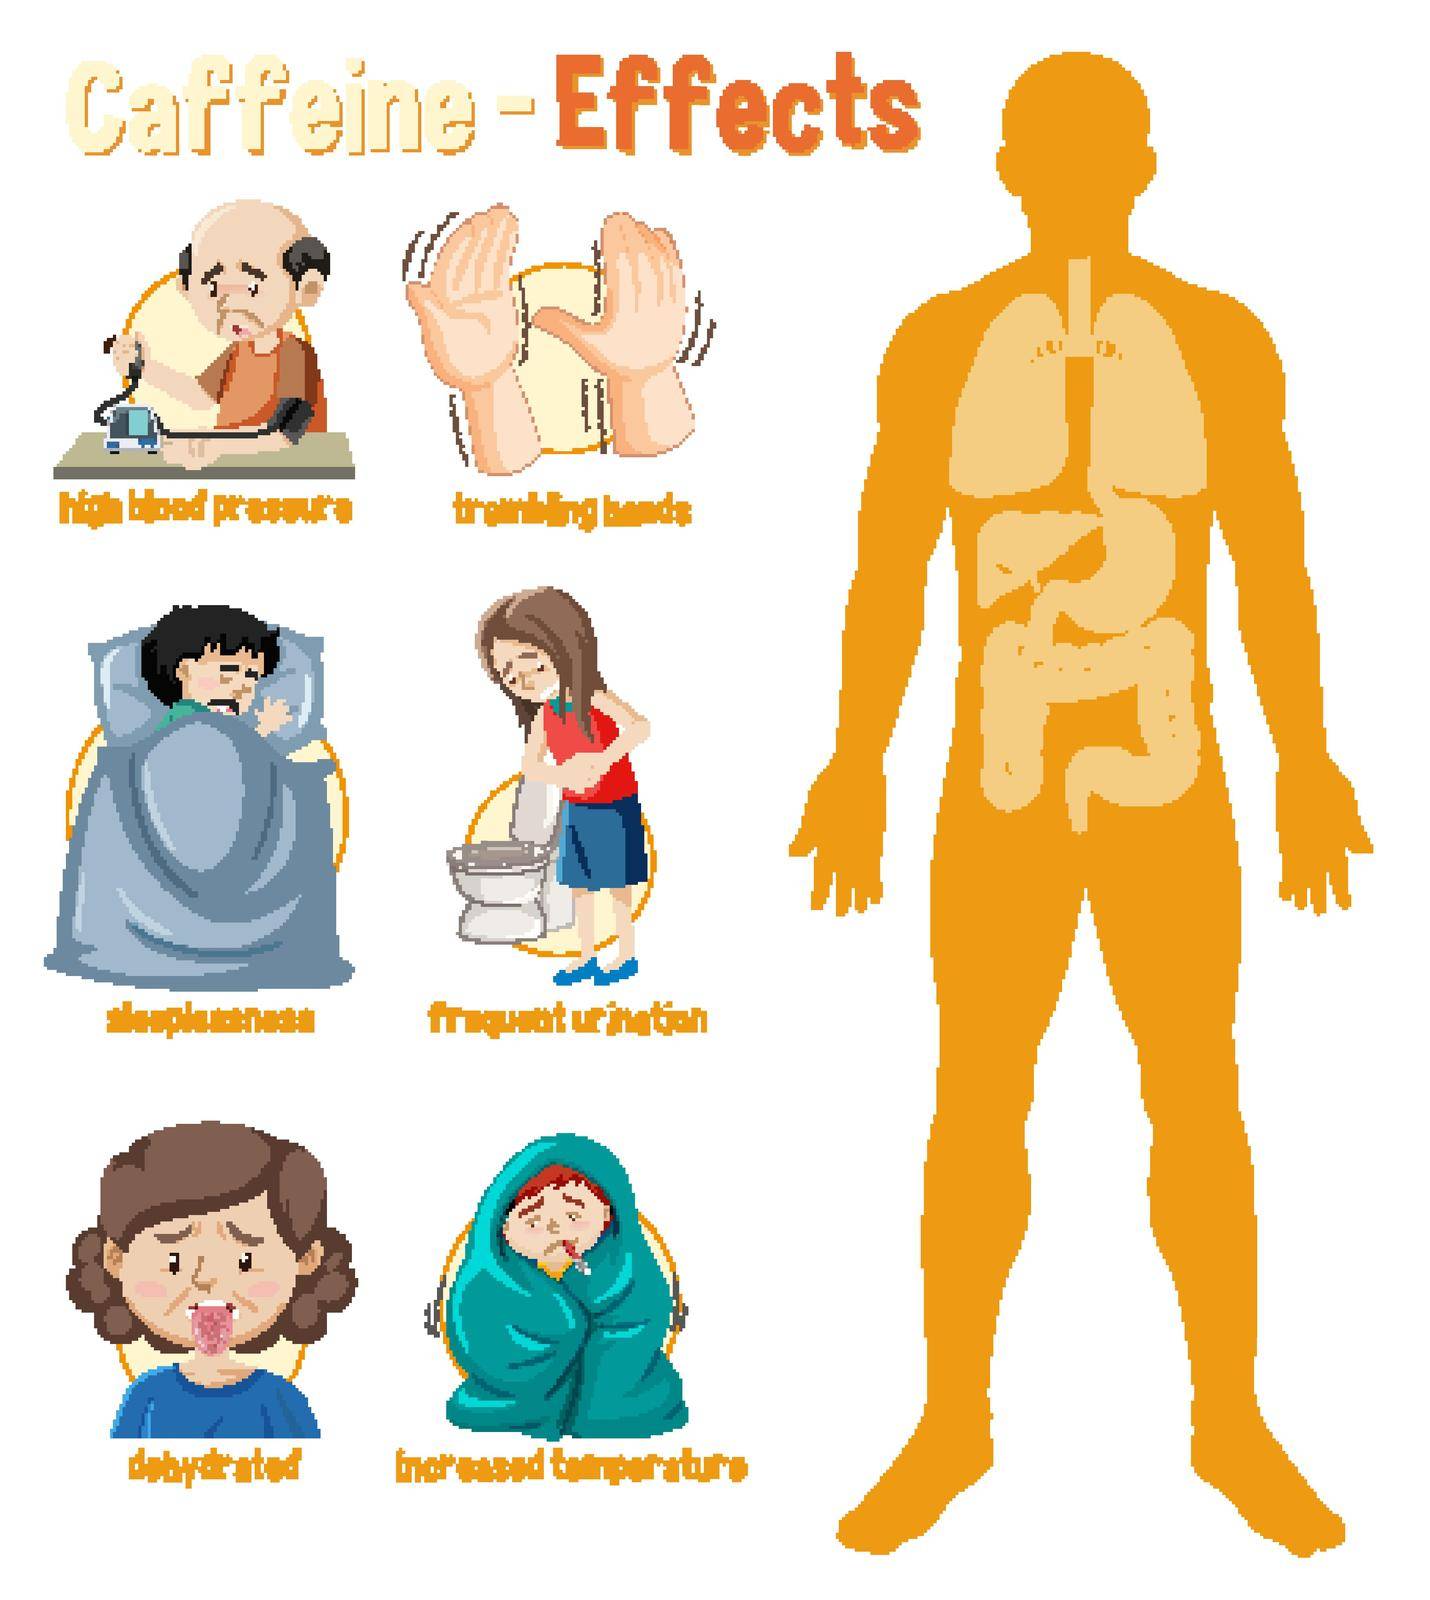 Health effects of Caffeine Infographic illustration